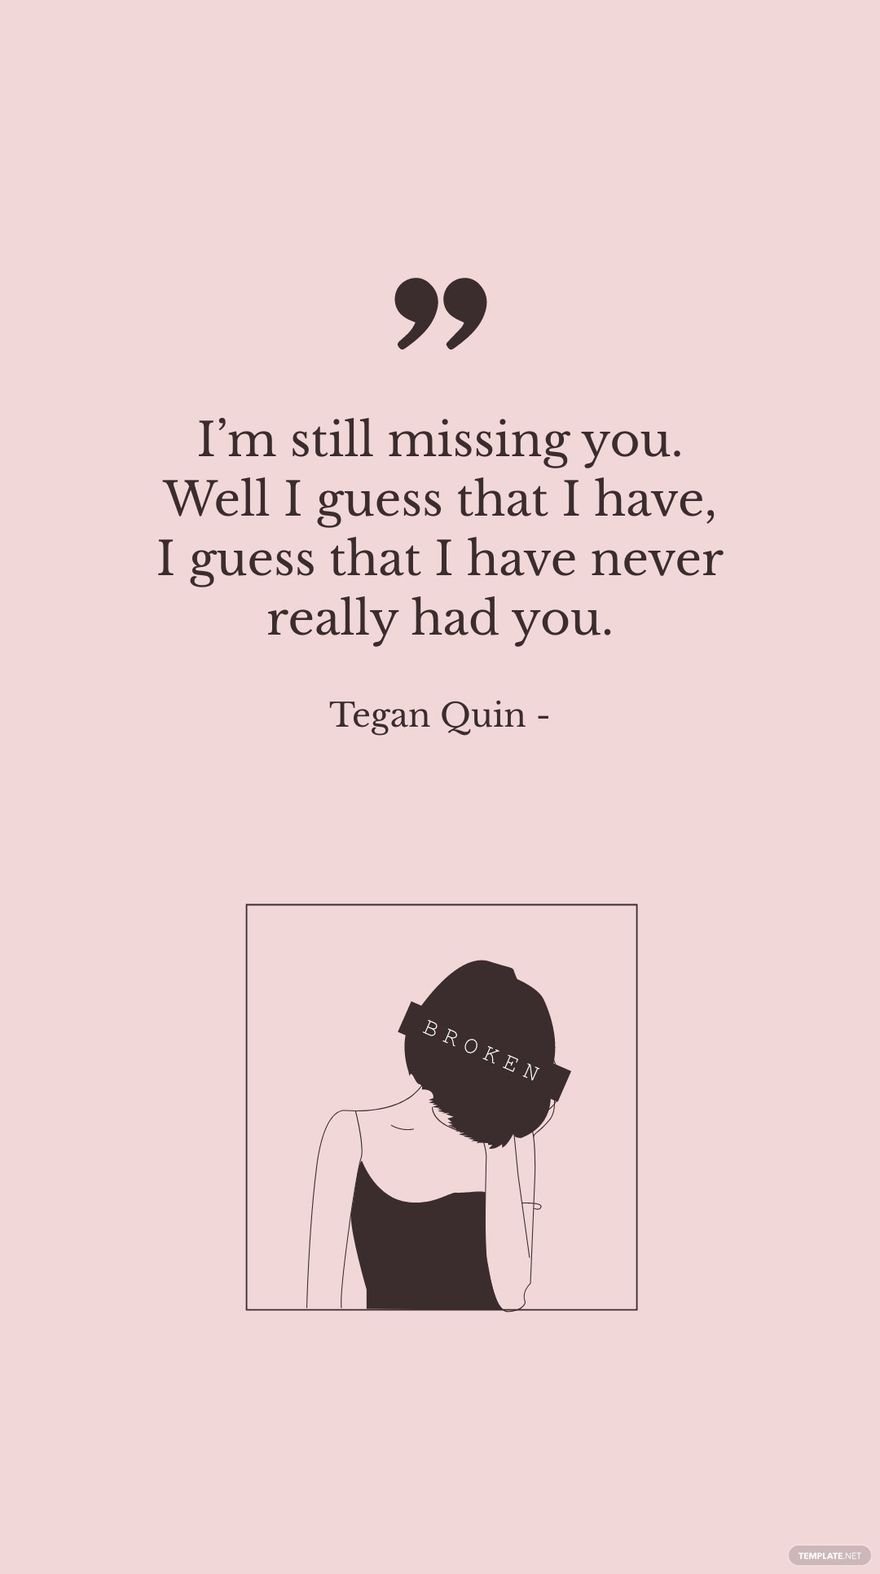 Free Tegan Quin - I’m still missing you. Well I guess that I have, I guess that I have never really had you.